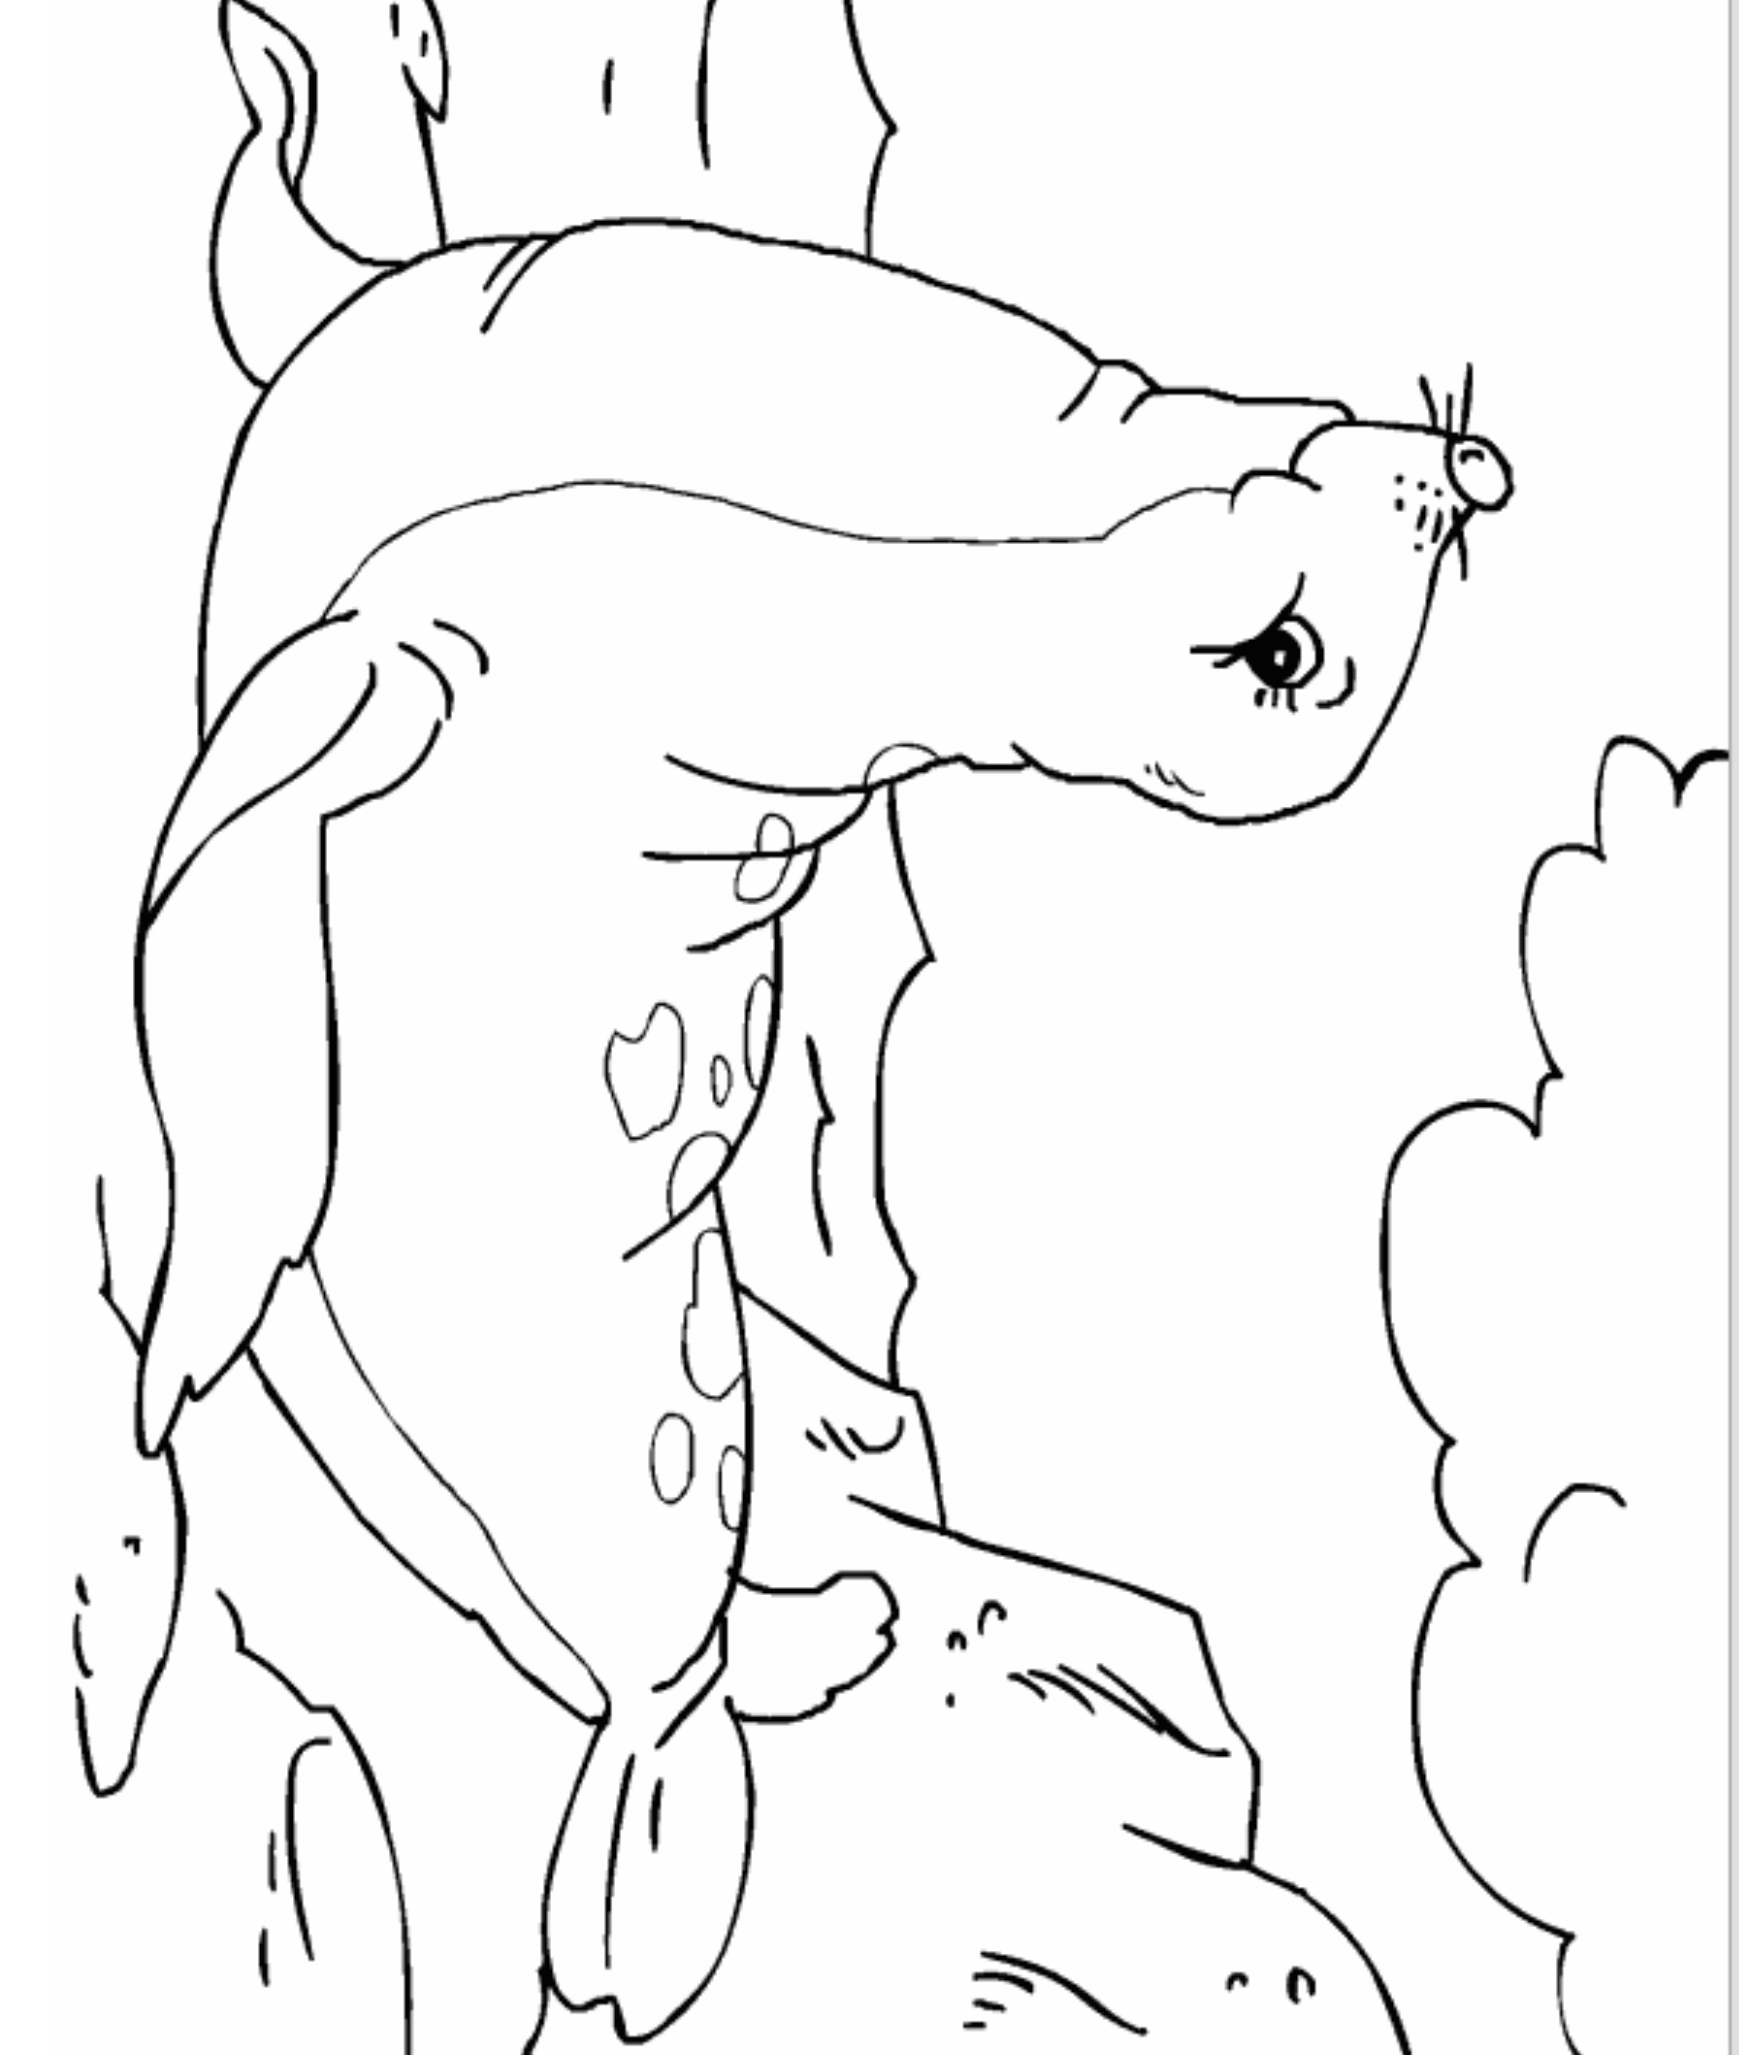 Drawing 21 from Seals coloring page to print and coloring